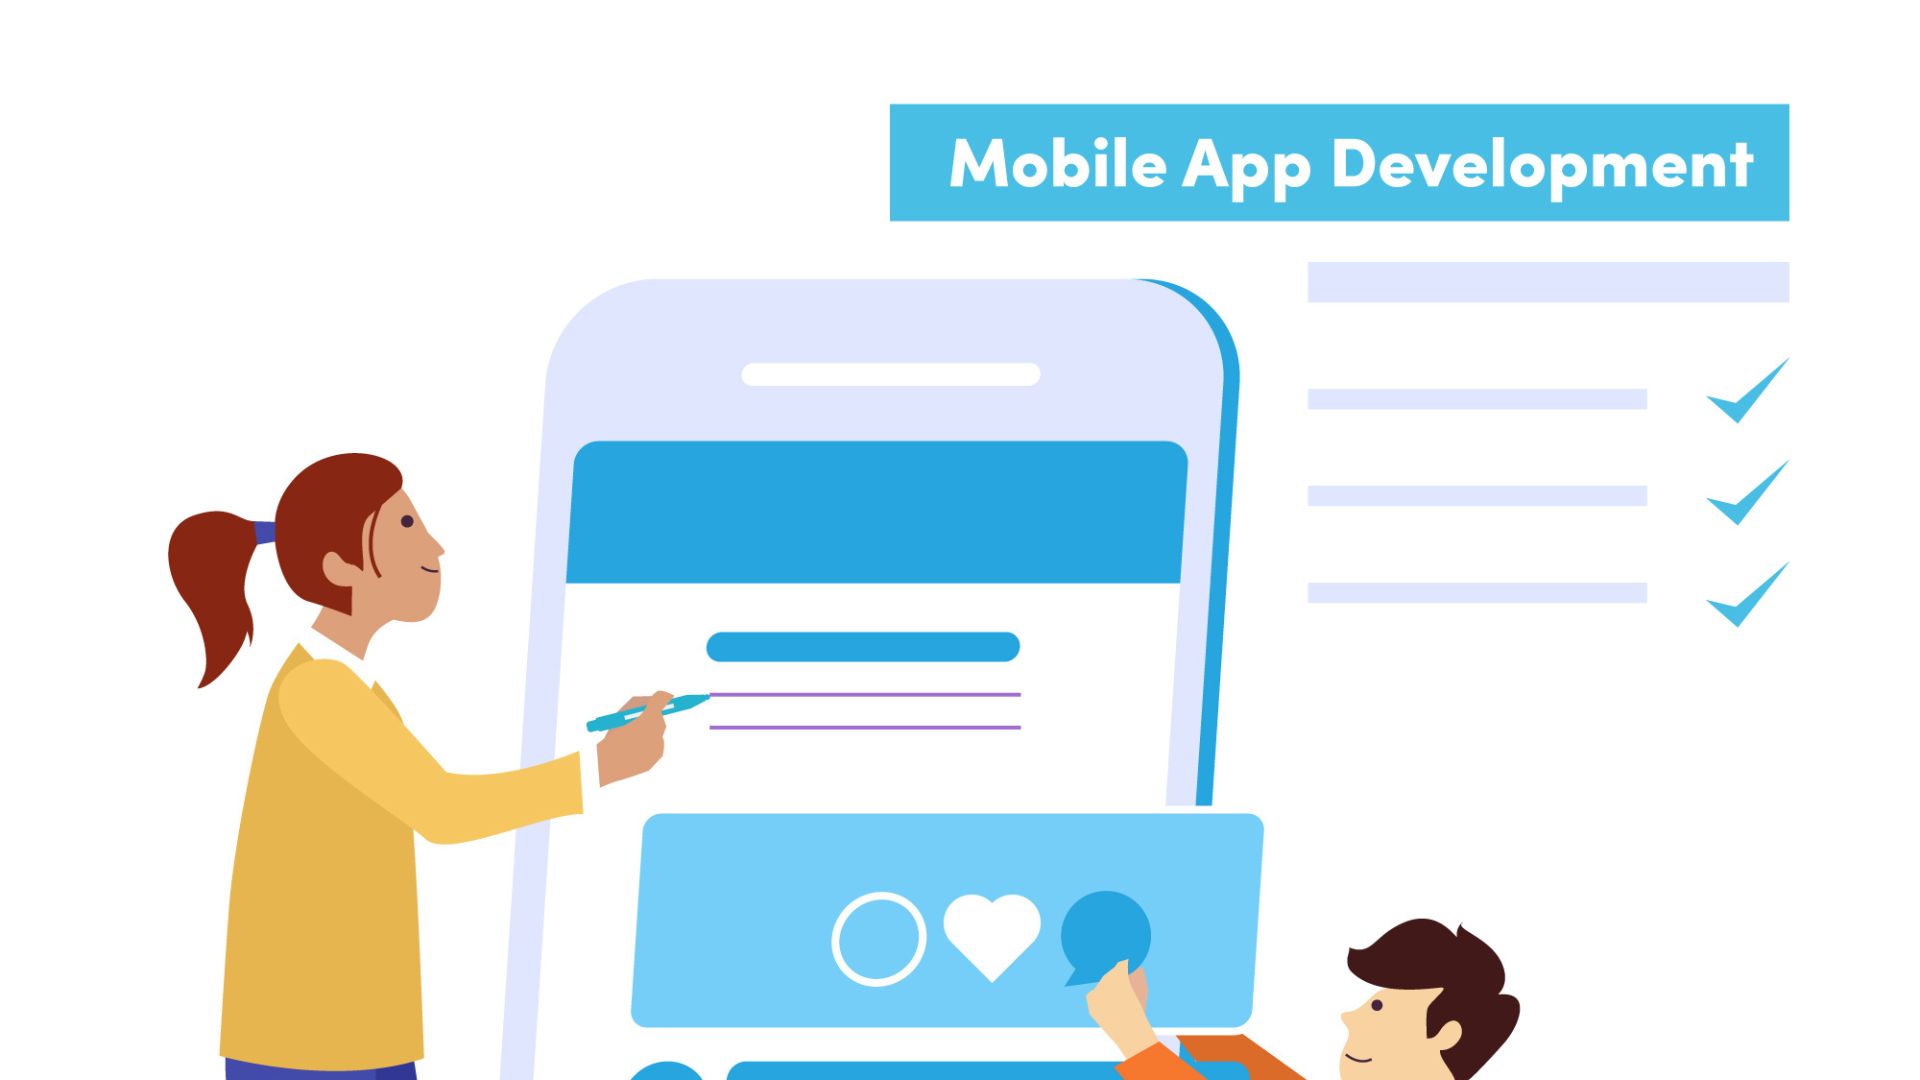 How to Choose the Right Platform for Your Mobile App Development Project